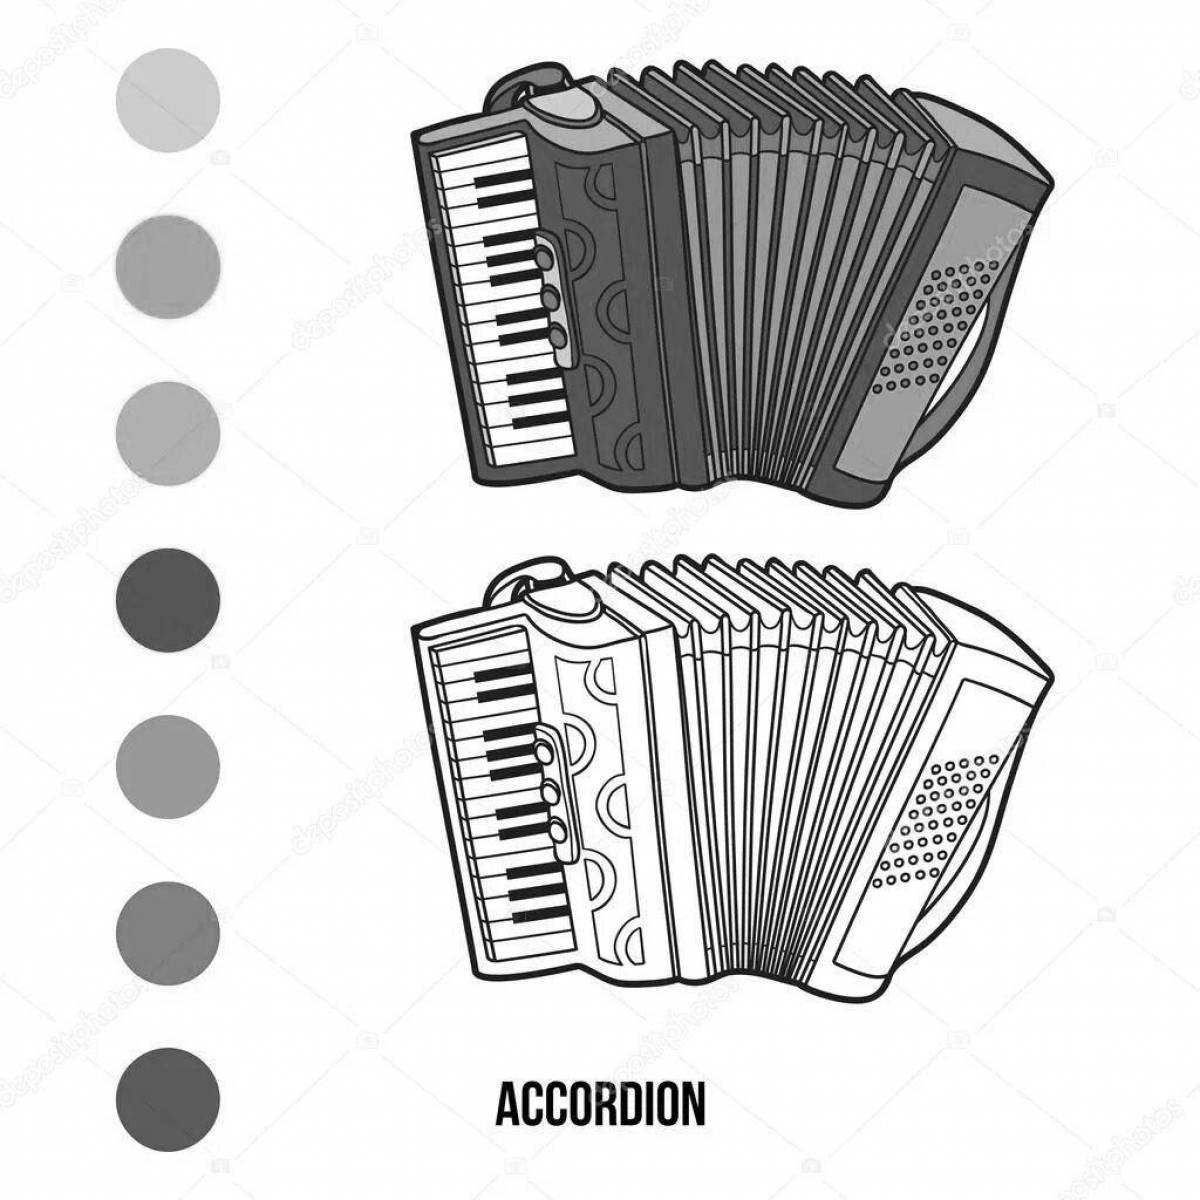 Living accordion coloring book for babies